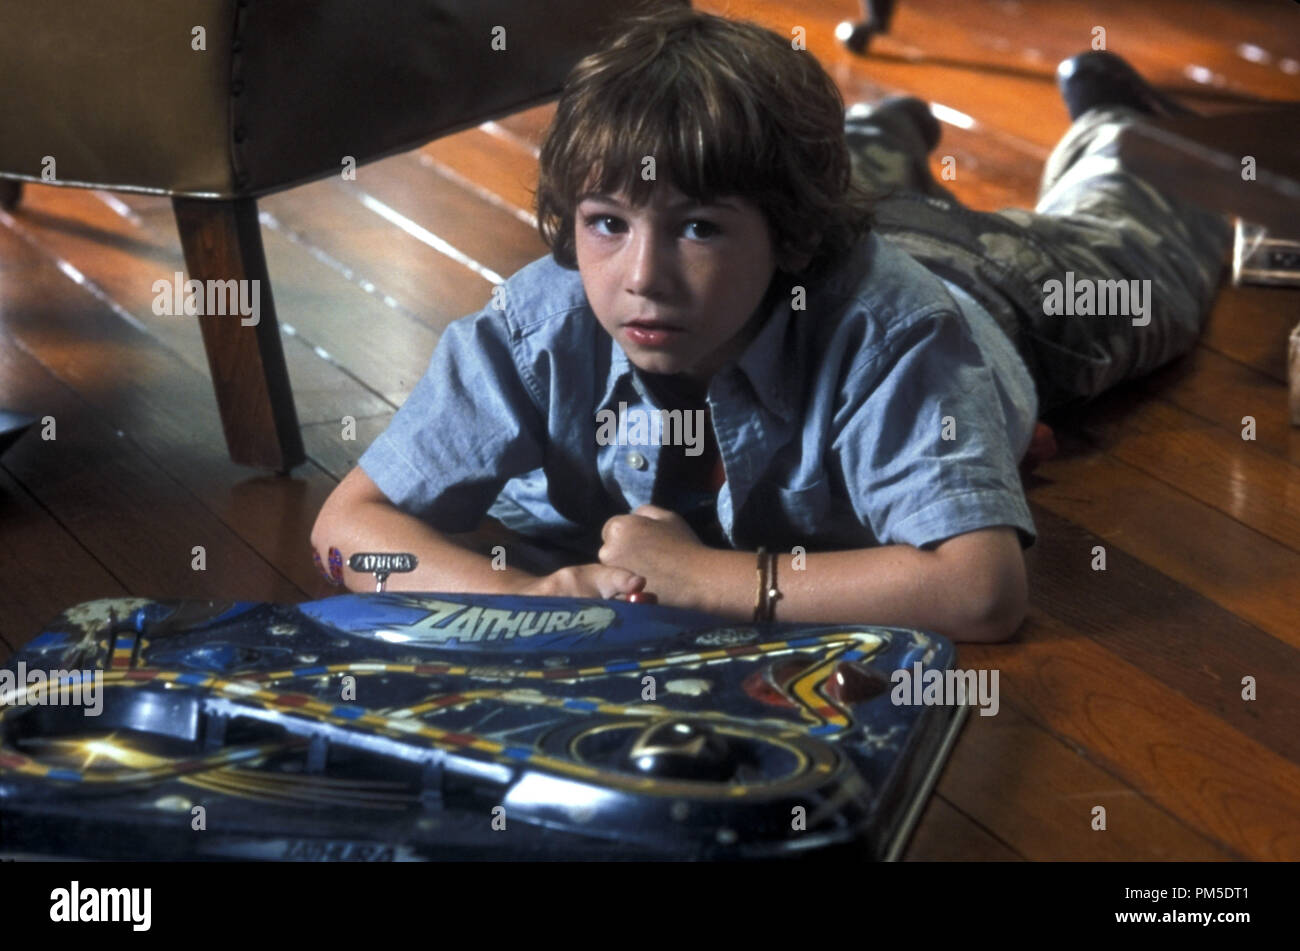 Film Still / Publicity Still from 'Zathura' Jonah Bobo © 2005 Columbia Pictures Photo Credit: Merrick Morton  File Reference # 30736553THA  For Editorial Use Only -  All Rights Reserved Stock Photo